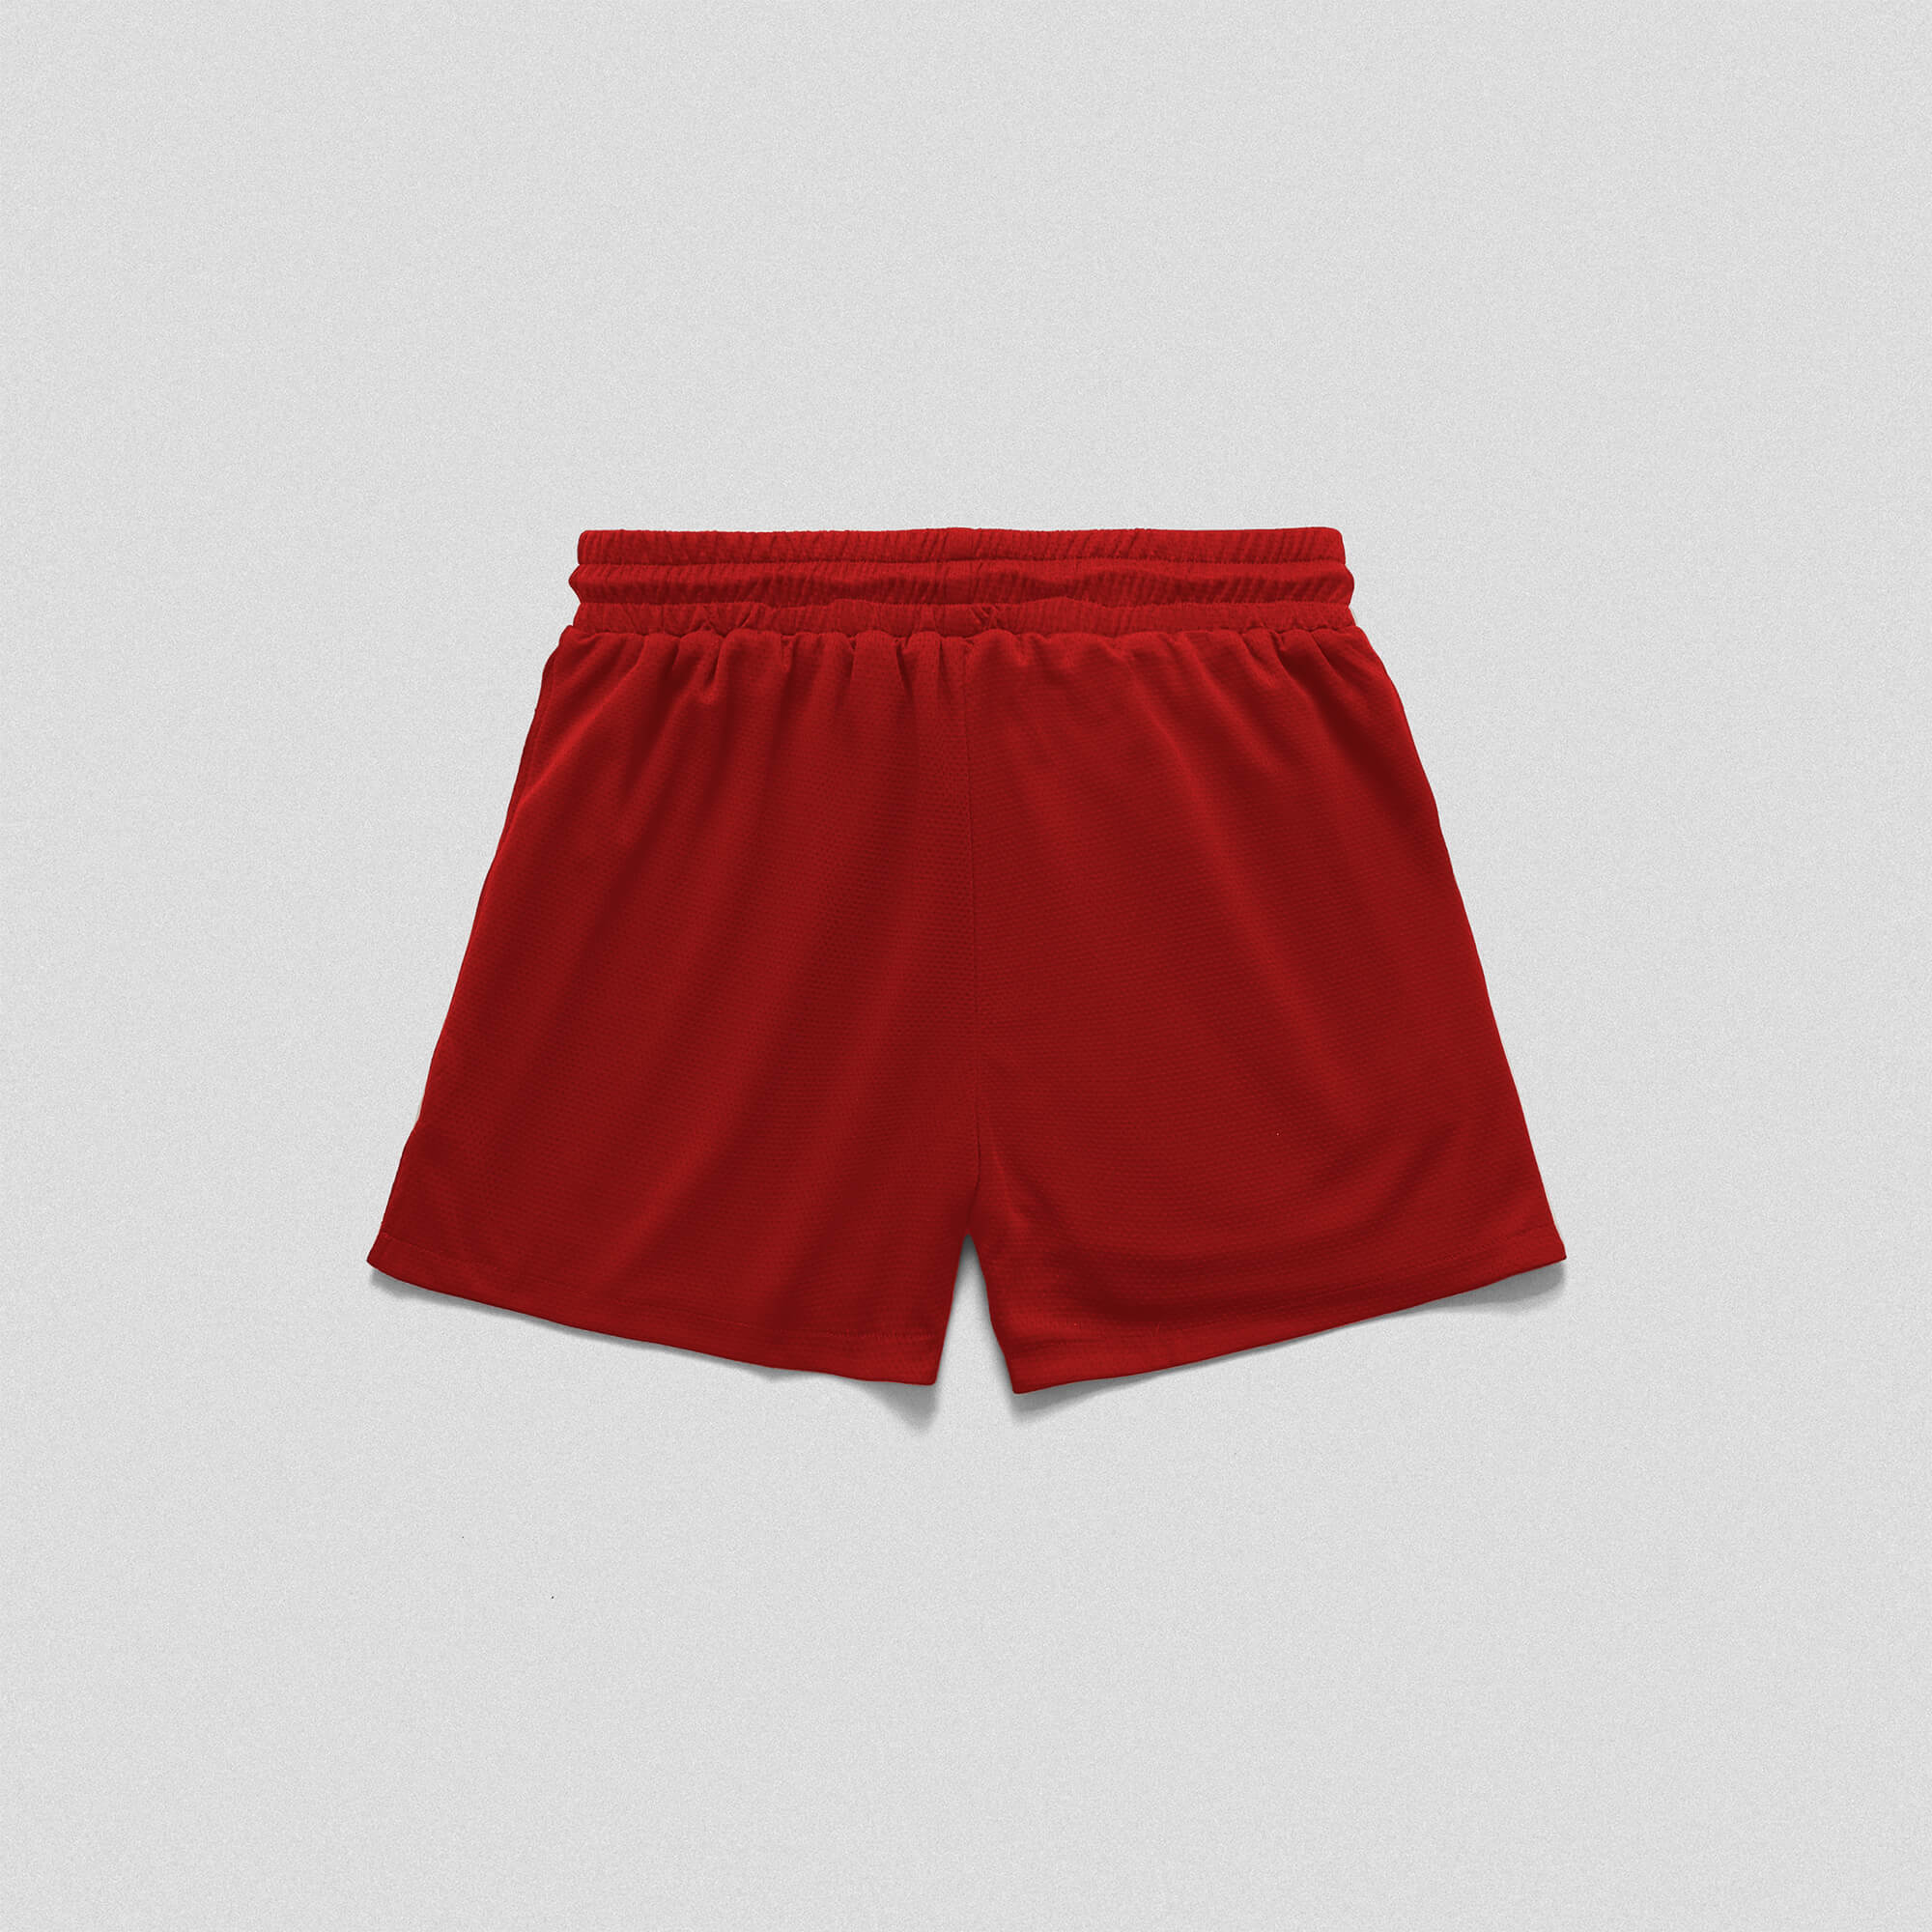 Red Shorts Gym